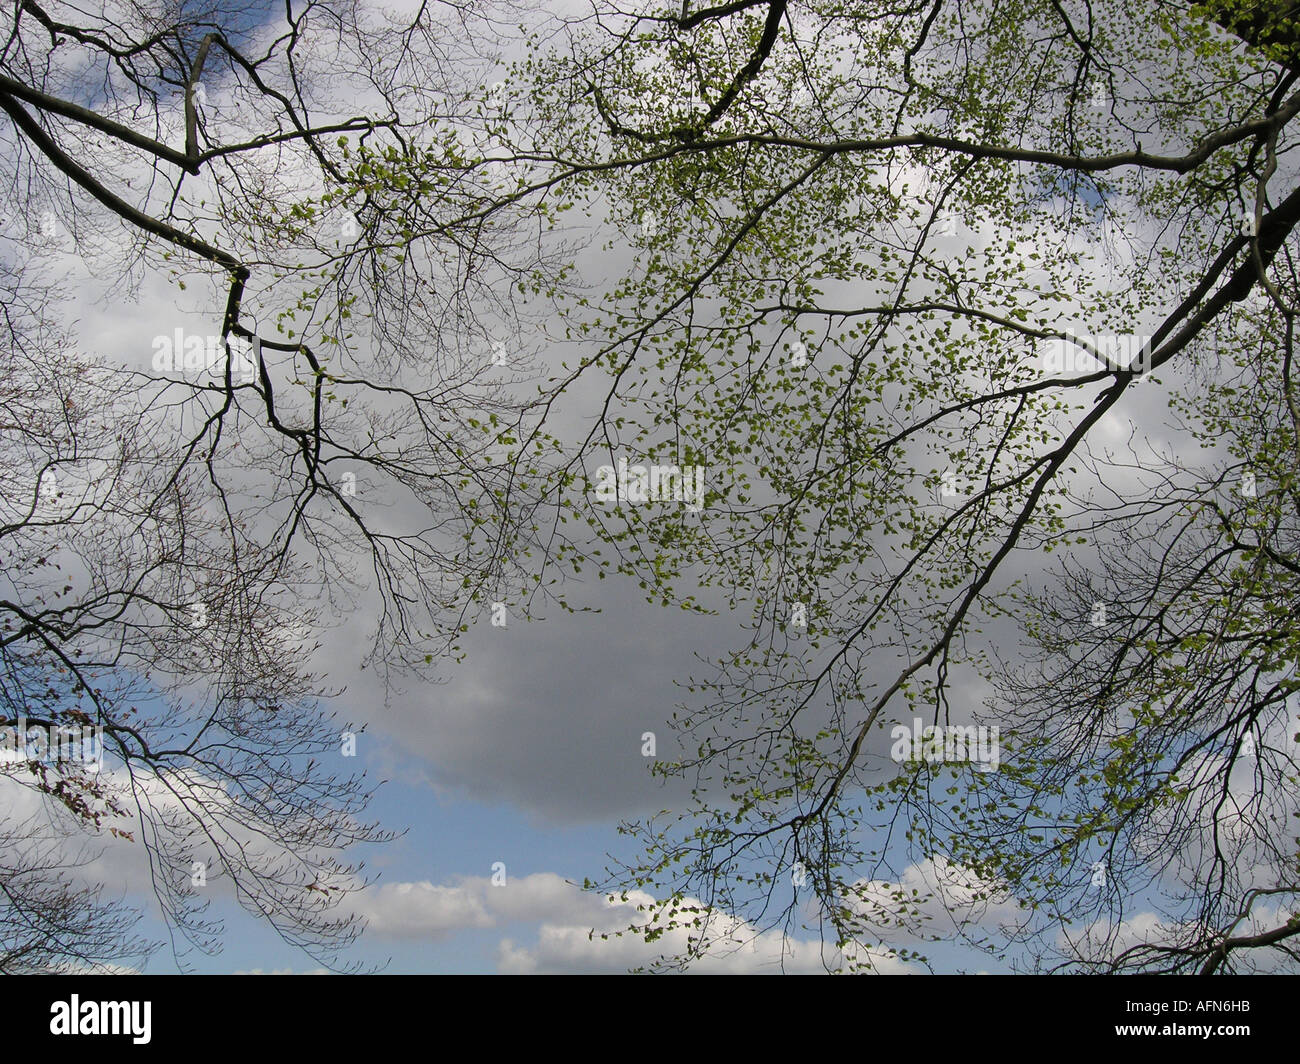 moody image of brooding clouds behind protruding branches of large tree framed image Stock Photo